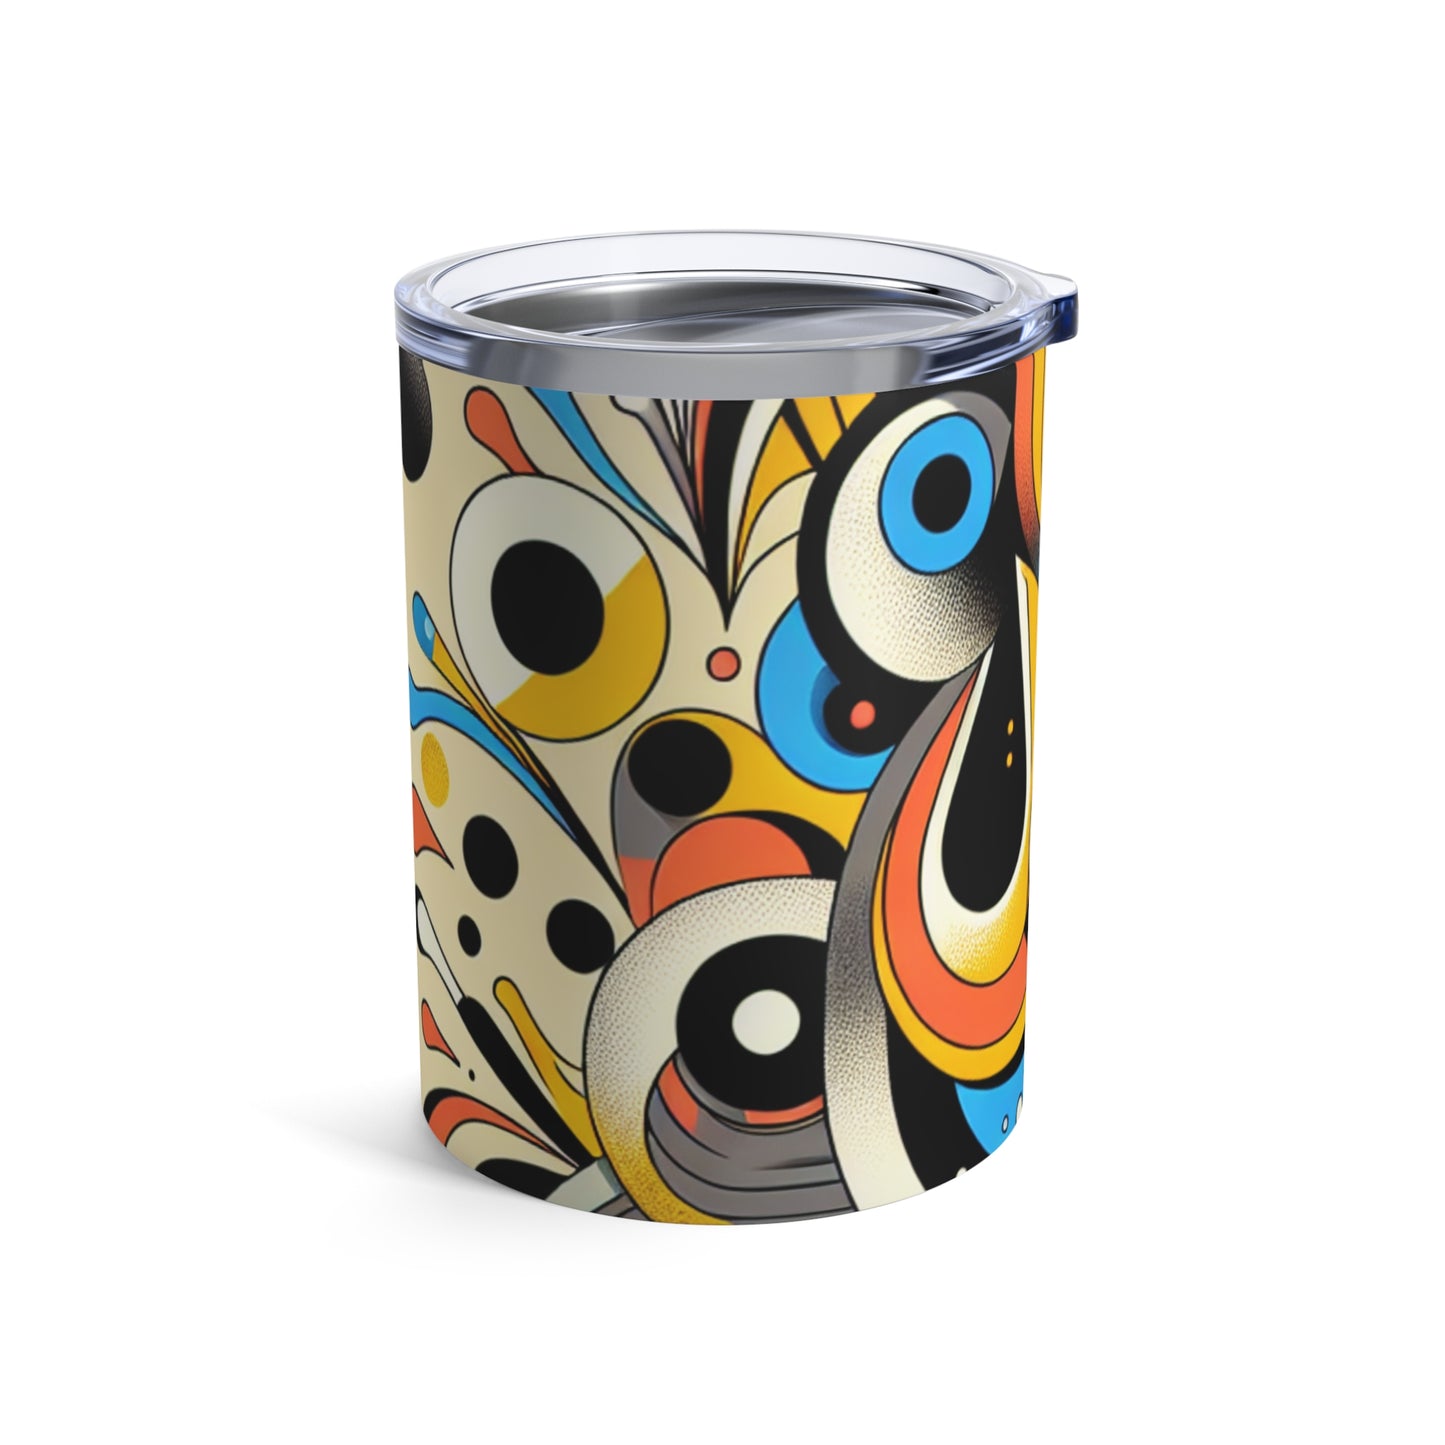 "Dada Fusion: A Whimsical Chaos of Everyday Objects" - The Alien Tumbler 10oz Neo-Dada